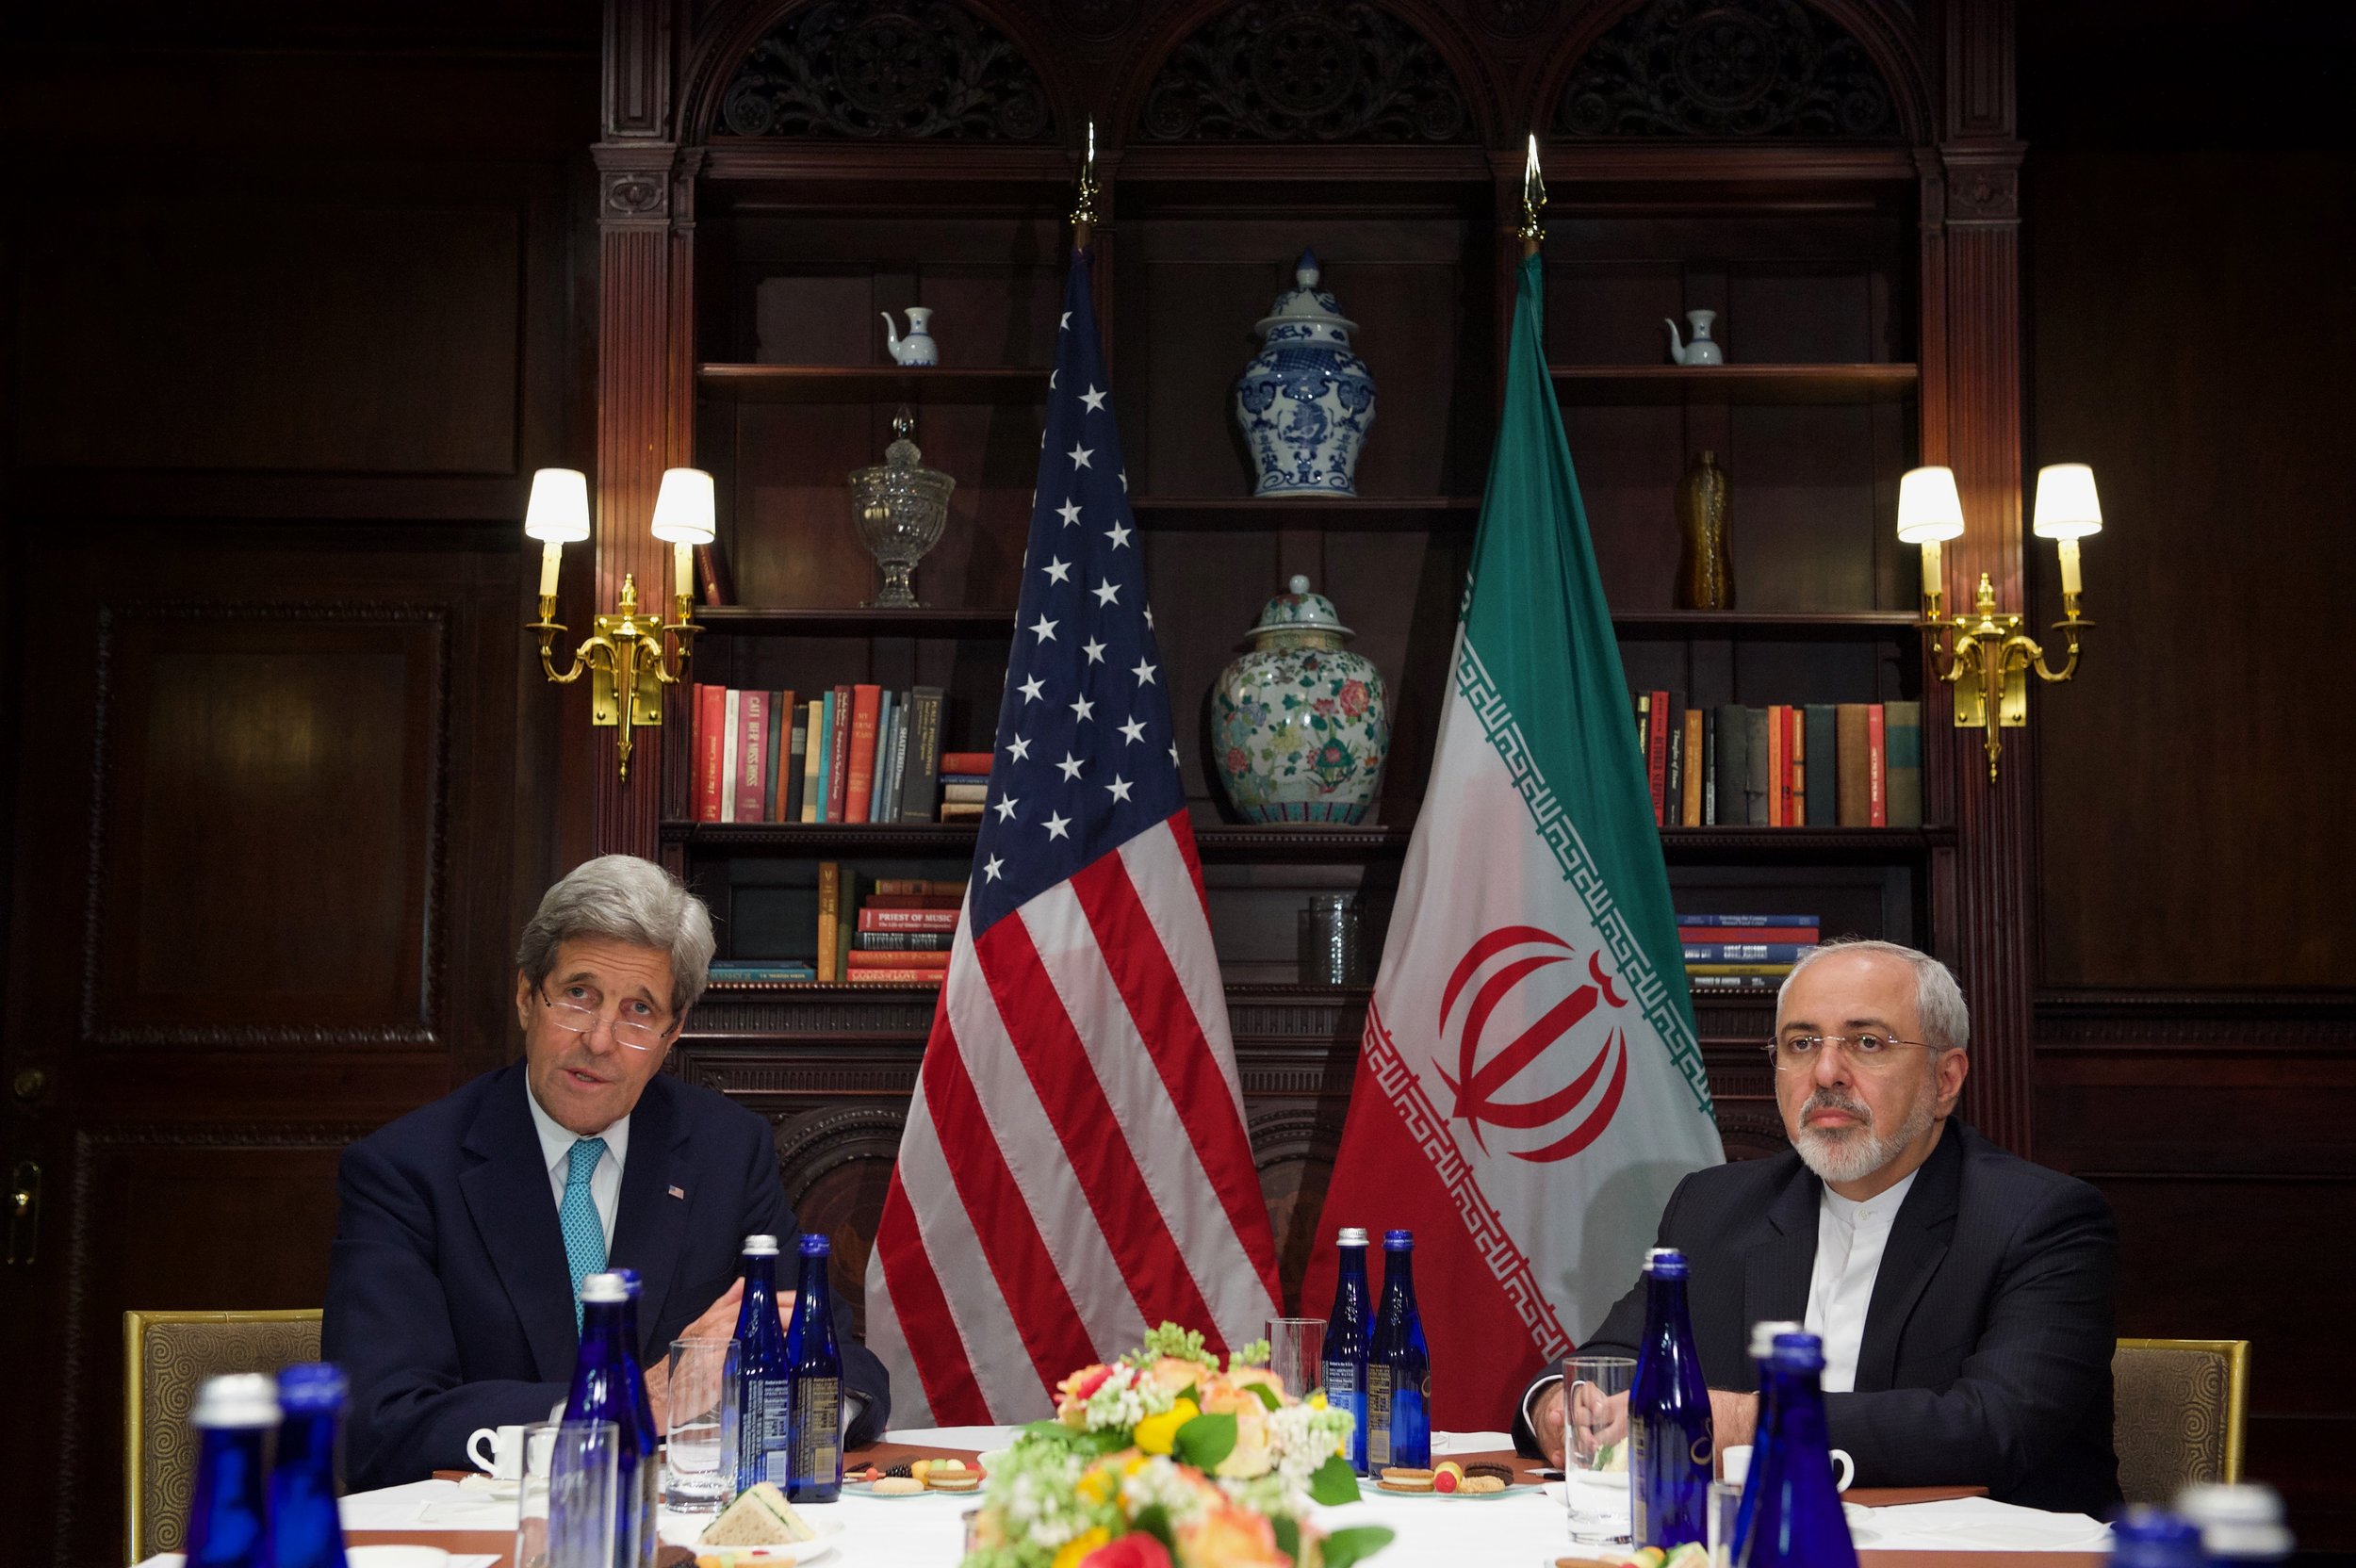  A one-on-one meeting between Secretary Kerry and Iranian Foreign Minister Zarif in New York City. 